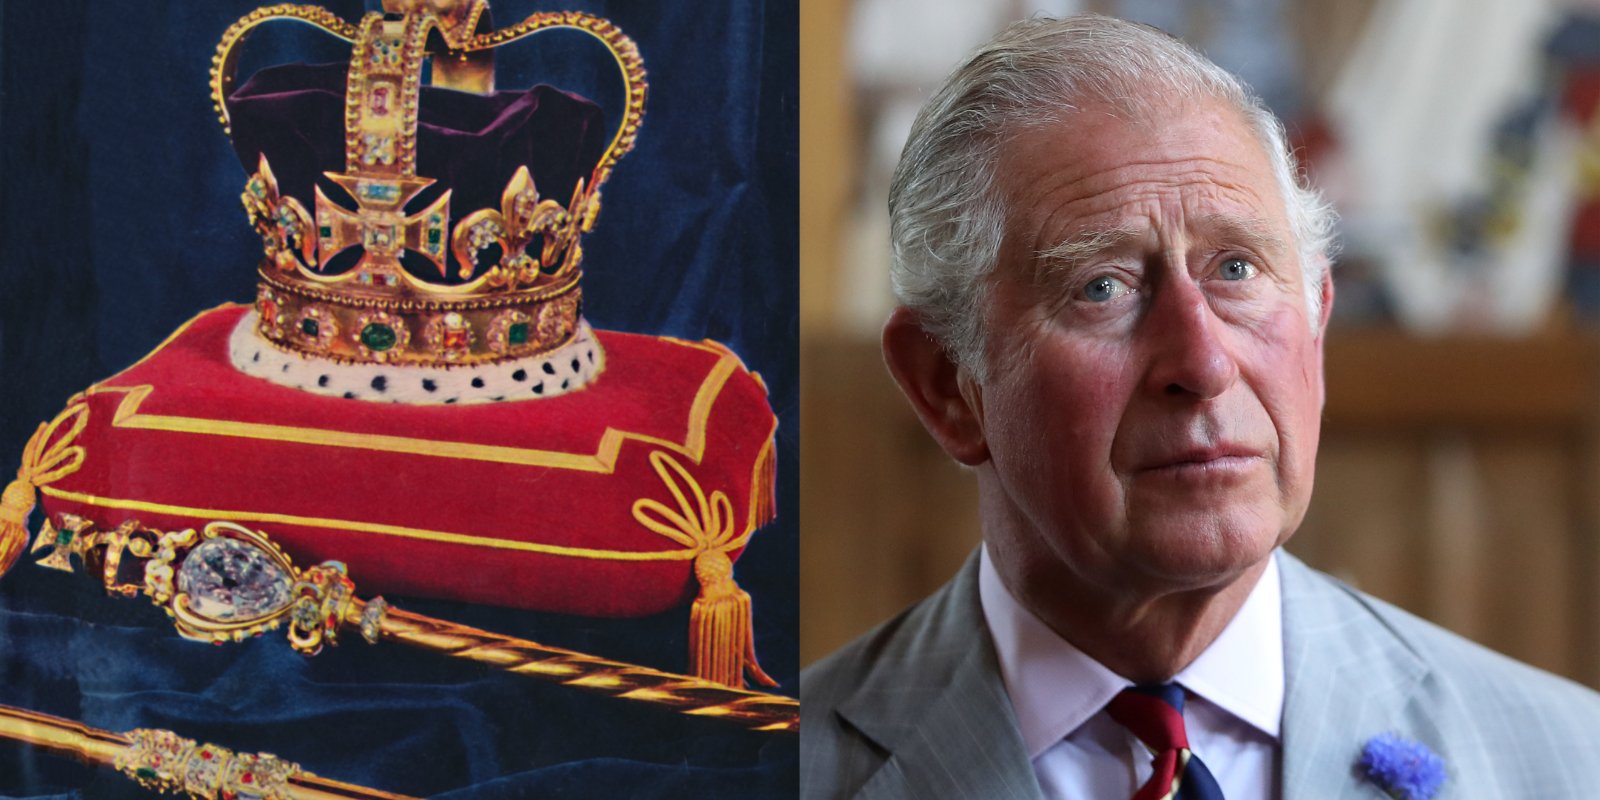 Why King Charles III Won’t be Coronated Until 2023